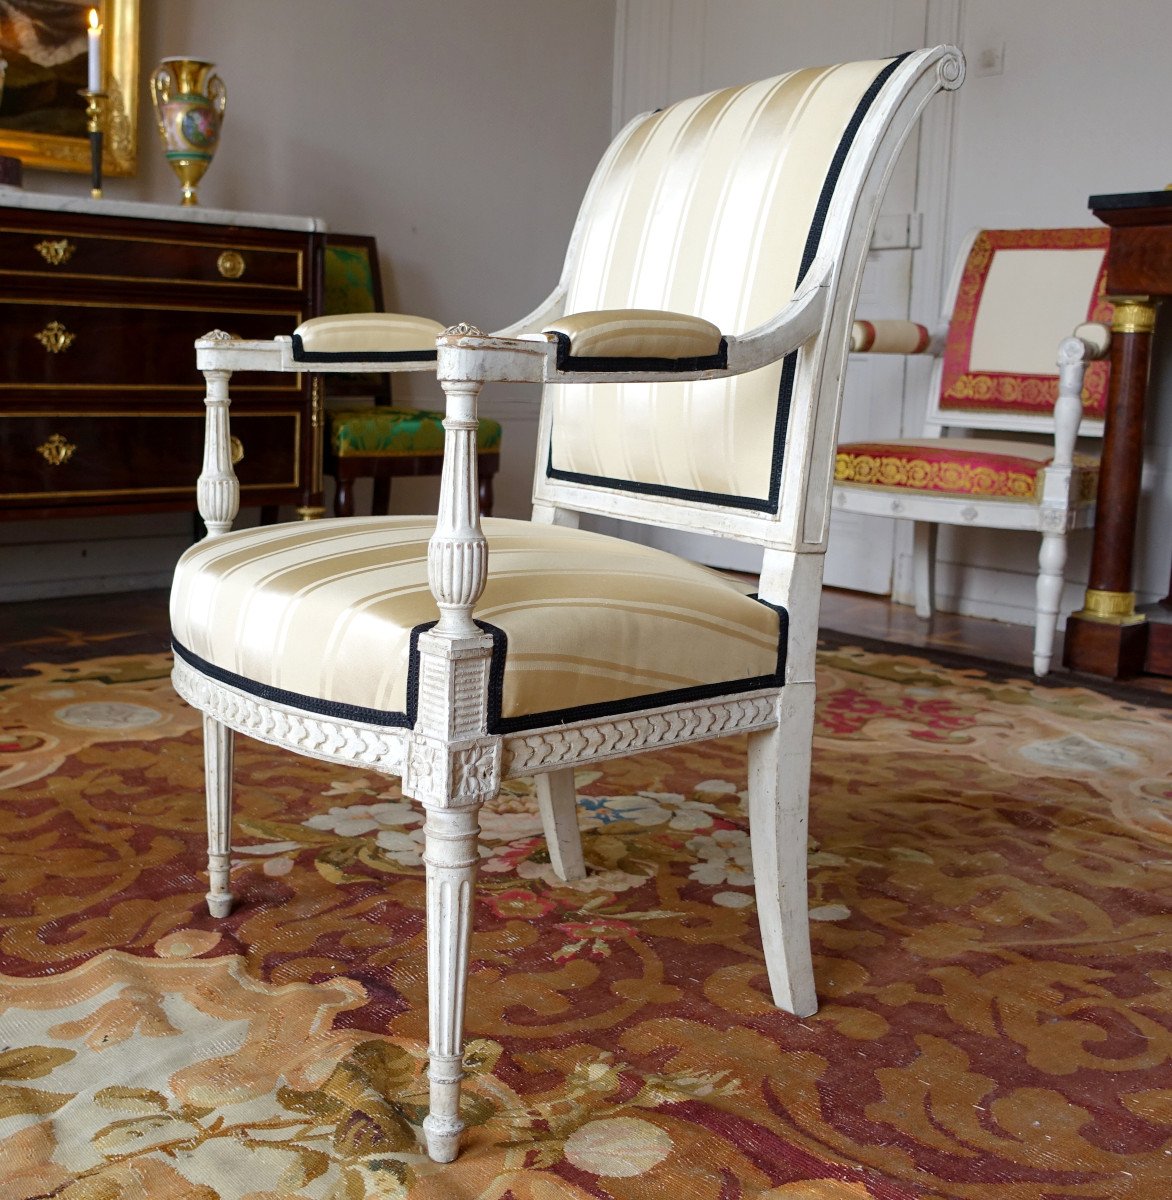 Directoire Period 5 Pieces Sitting Set  4 Armchairs And A Sofa In The Taste Of Jacob Late 18th-photo-5